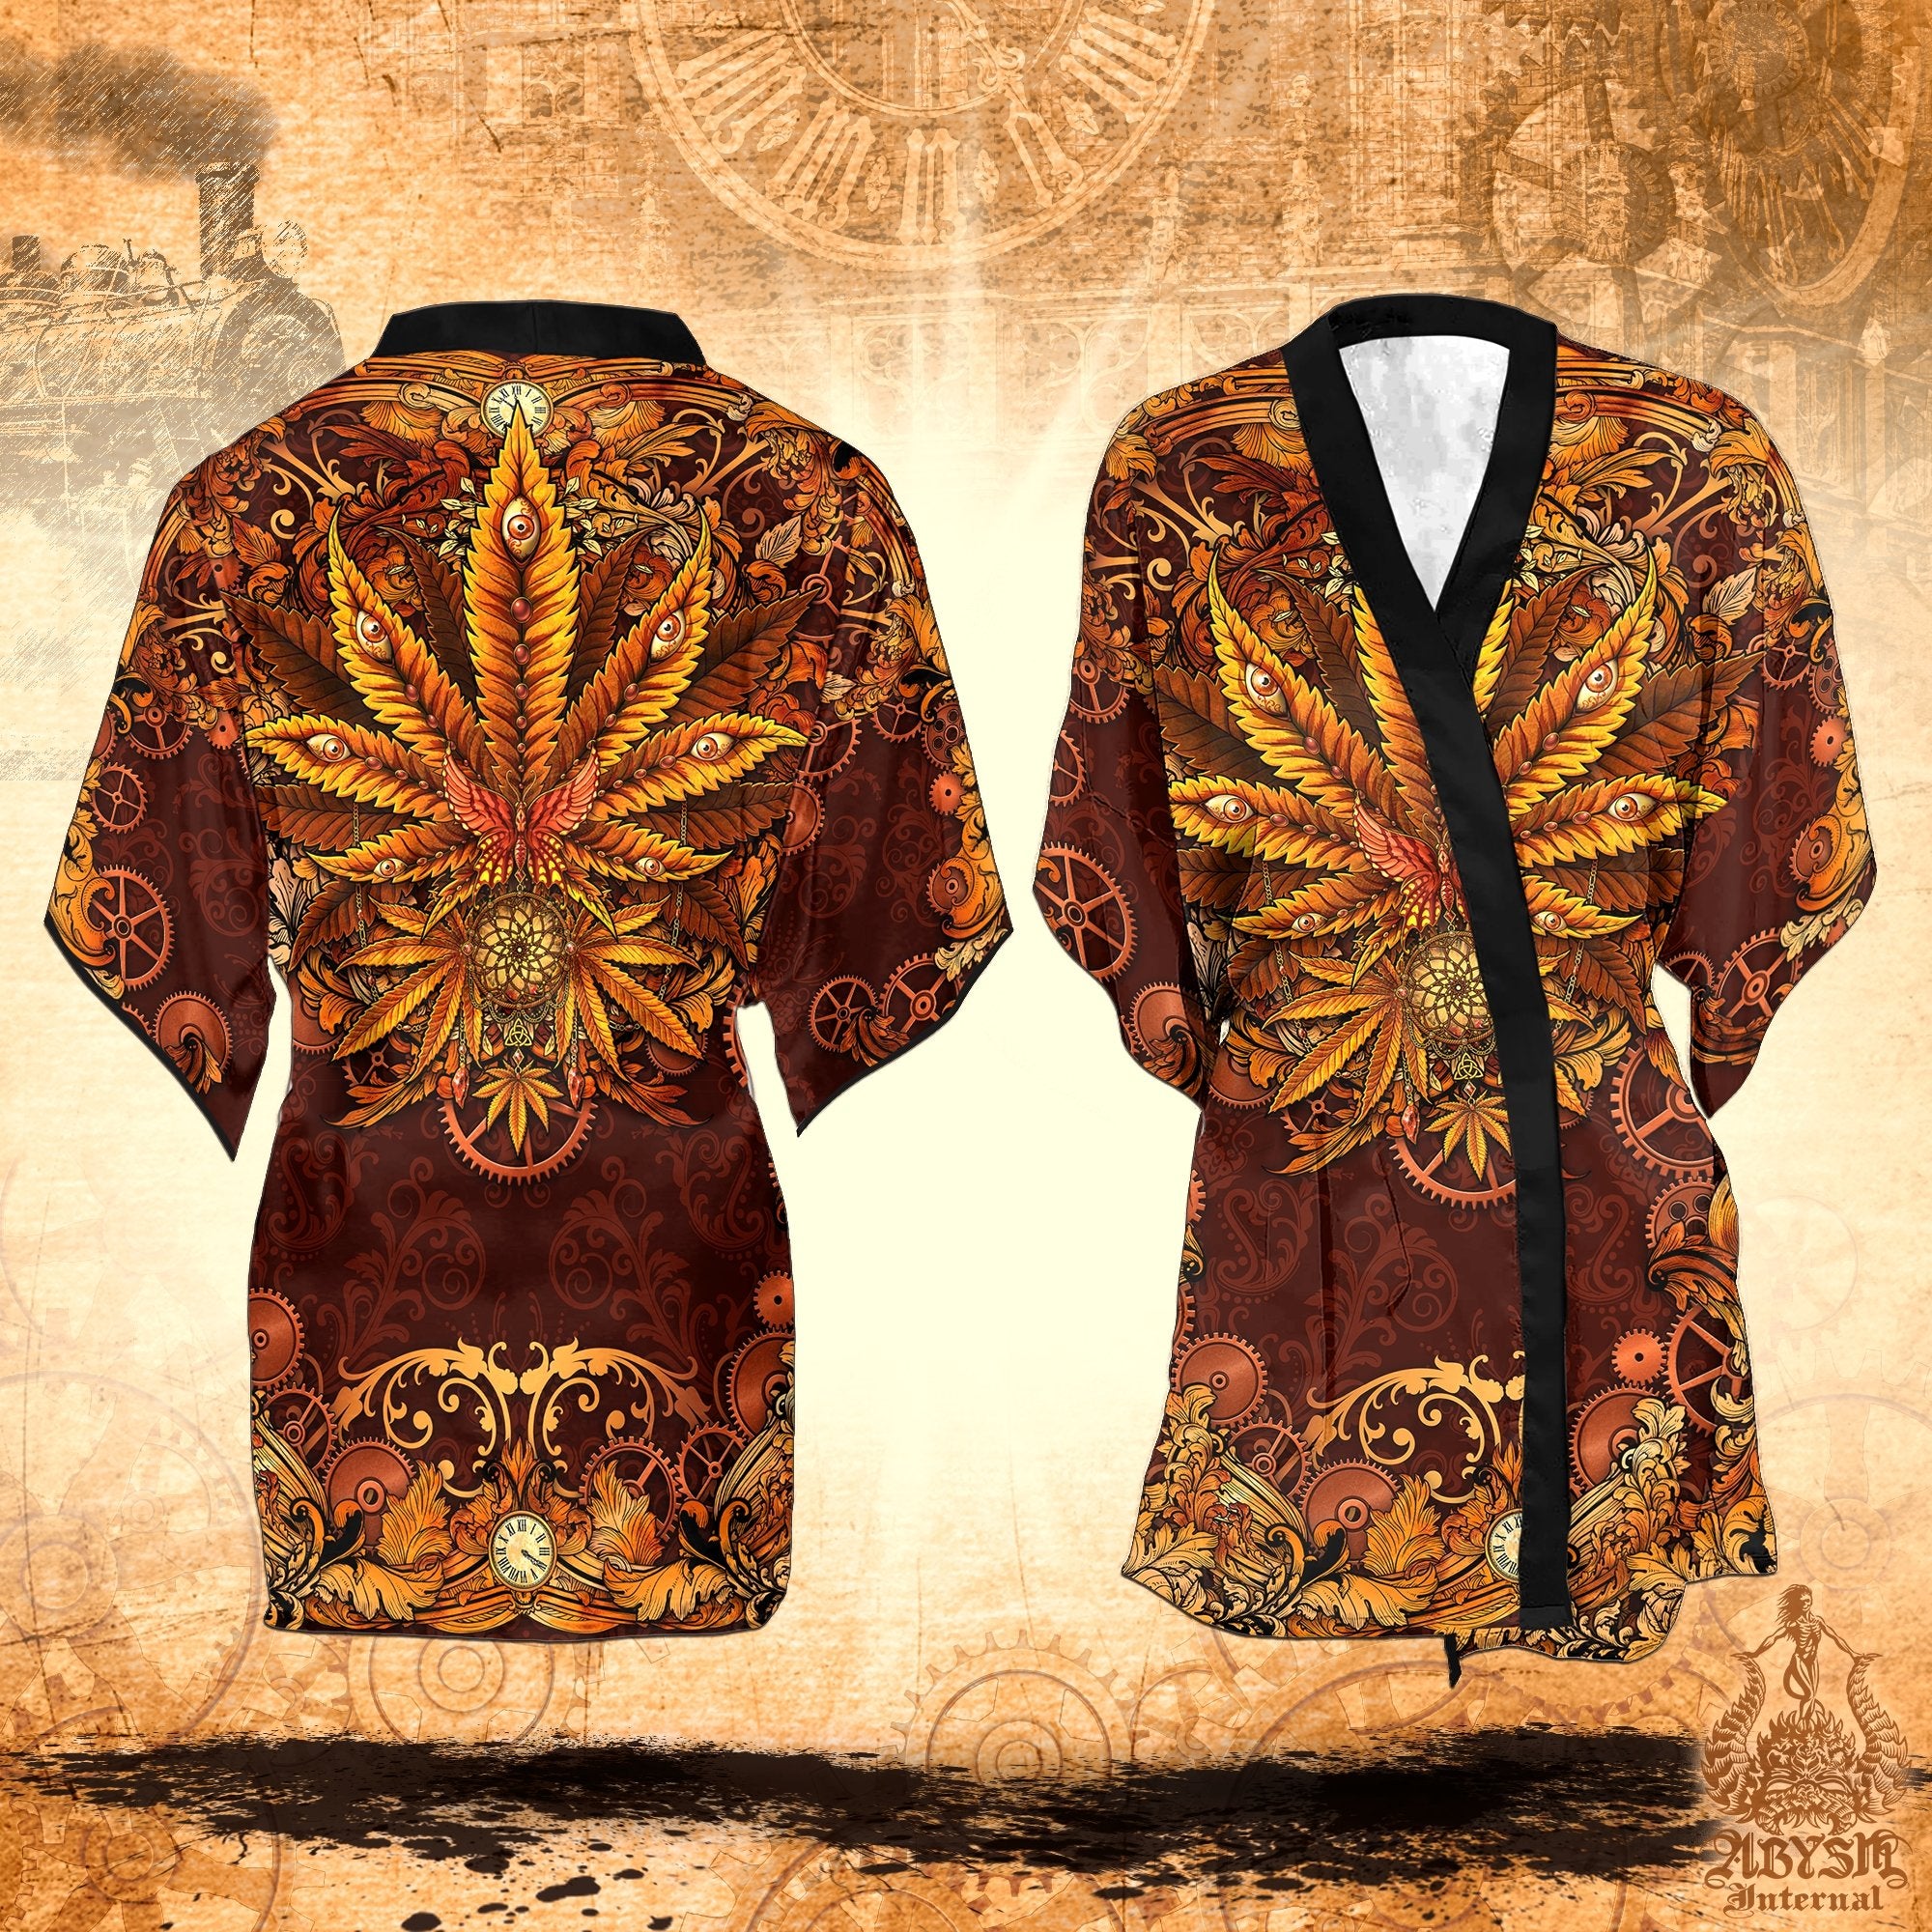 Weed Cover Up, Cannabis Outfit, Indie Party Kimono, Steampunk Summer Festival Robe, 420 Gift, Indie Clothing, Unisex - Marijuana - Abysm Internal